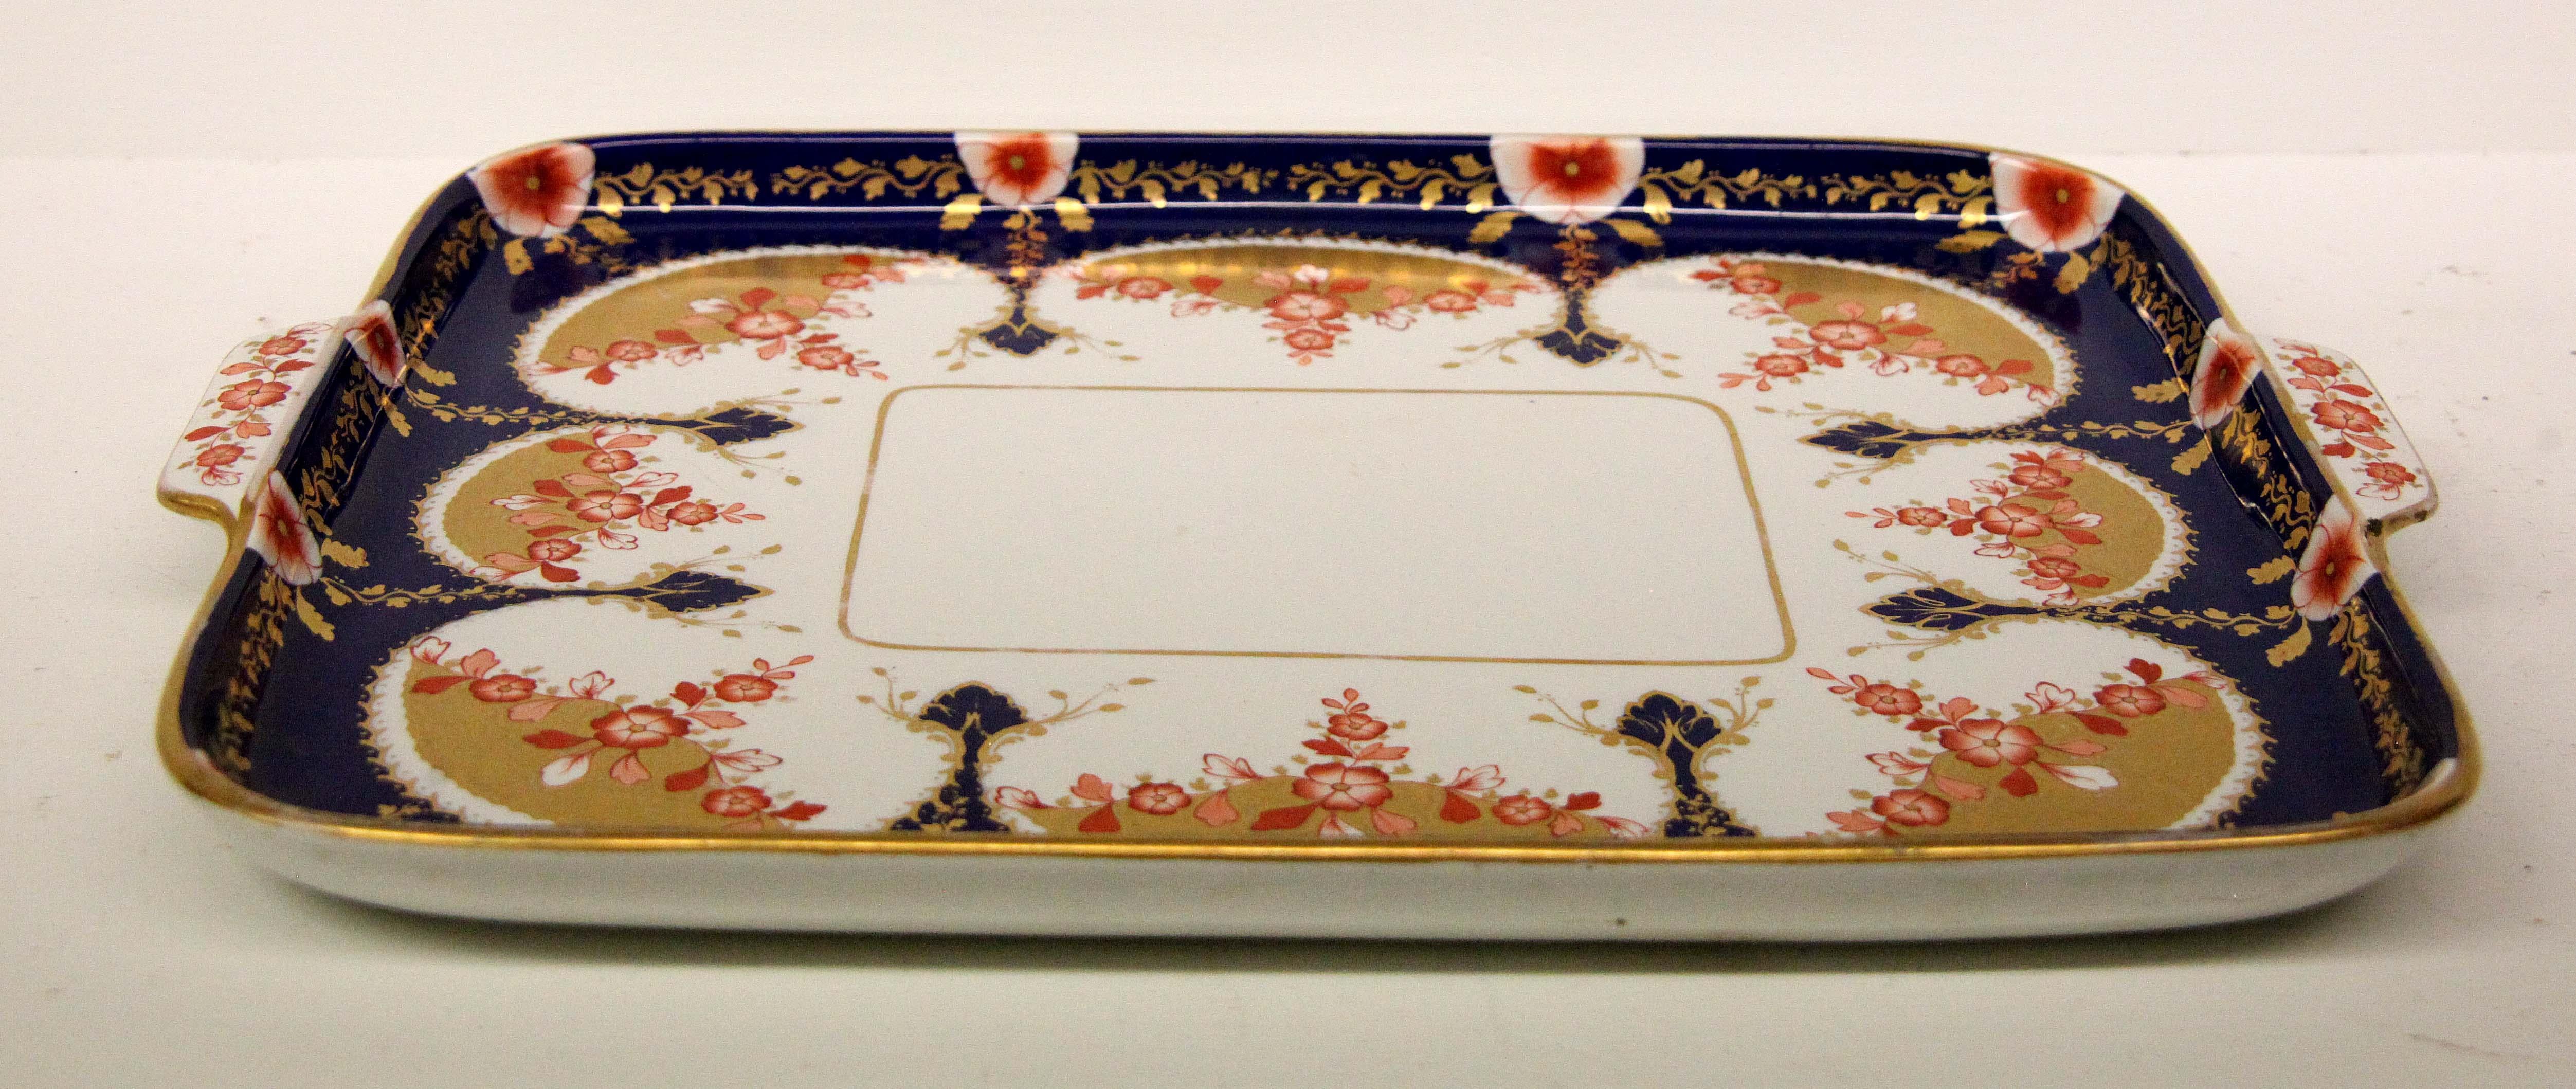 19th Century English Copeland Porcelain Serving Tray For Sale 3